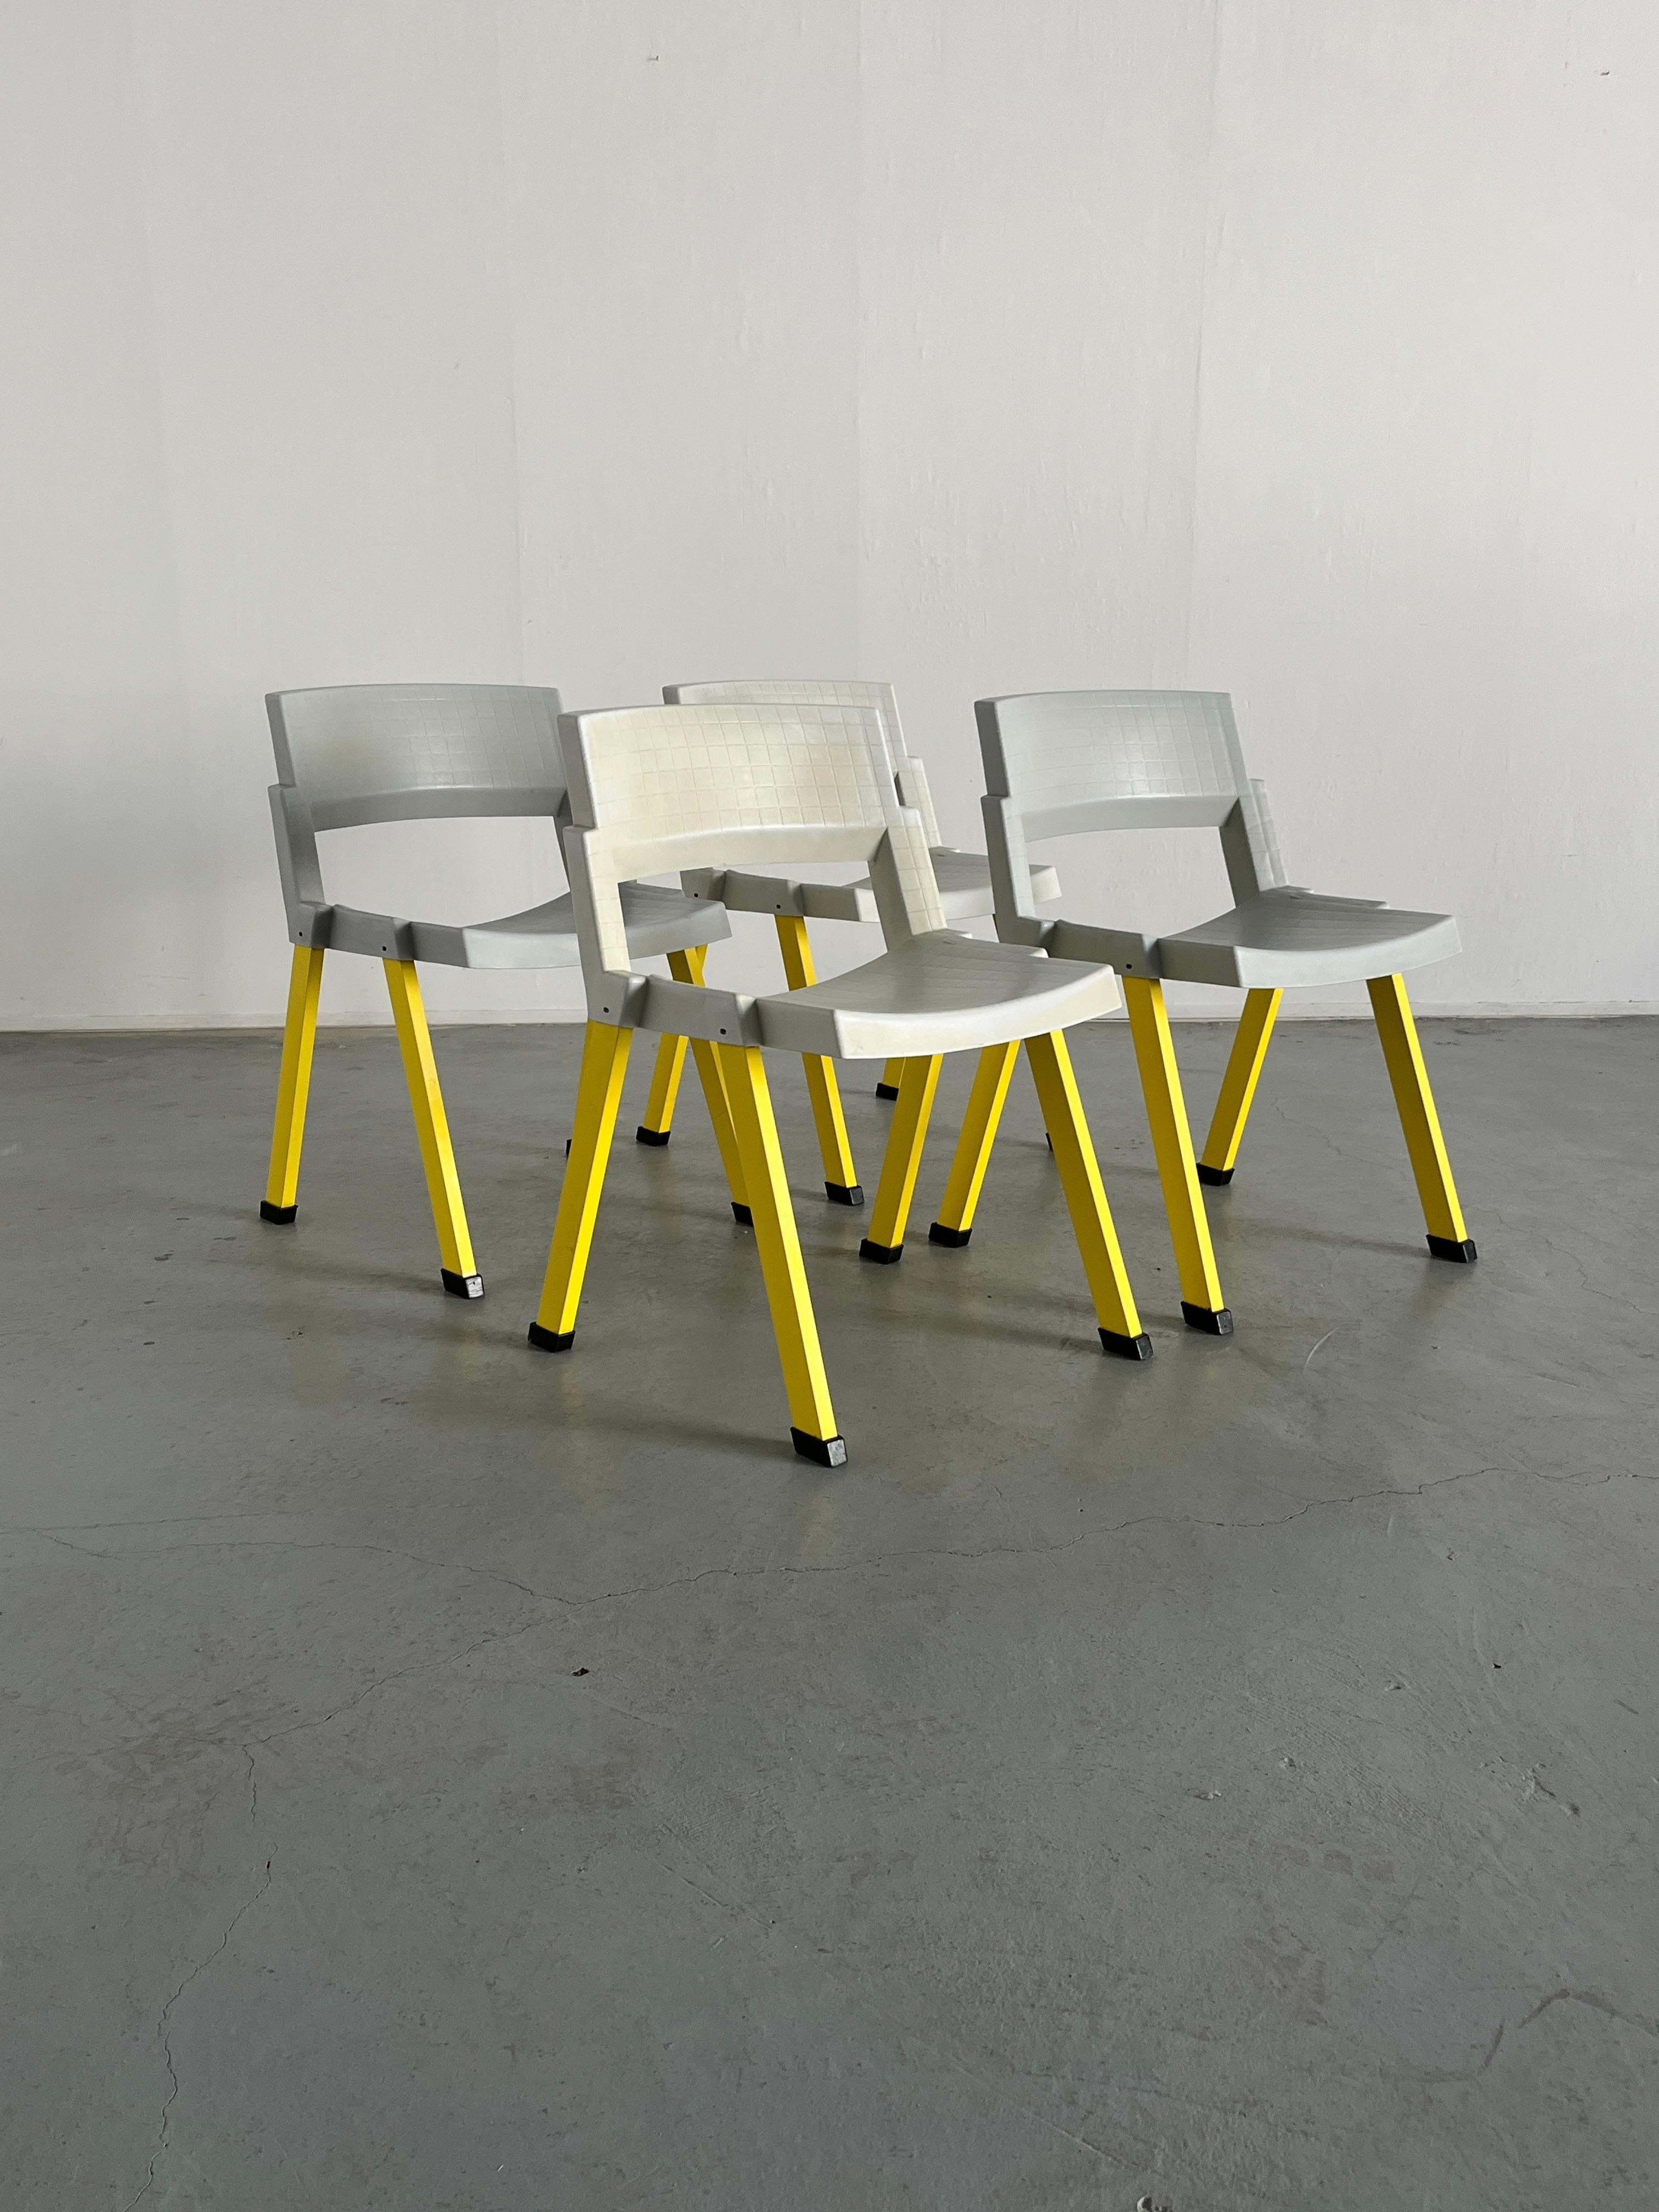 Set of four brightly colored plastic Memphis design postmodern chairs, designed by Paolo Orlandini and Roberto Lucci, produced in 1987 by Lamm S.P.A.
For outdoor or indoor use.
Stackable.
Labeled.

Overall in good vintage condition with expected